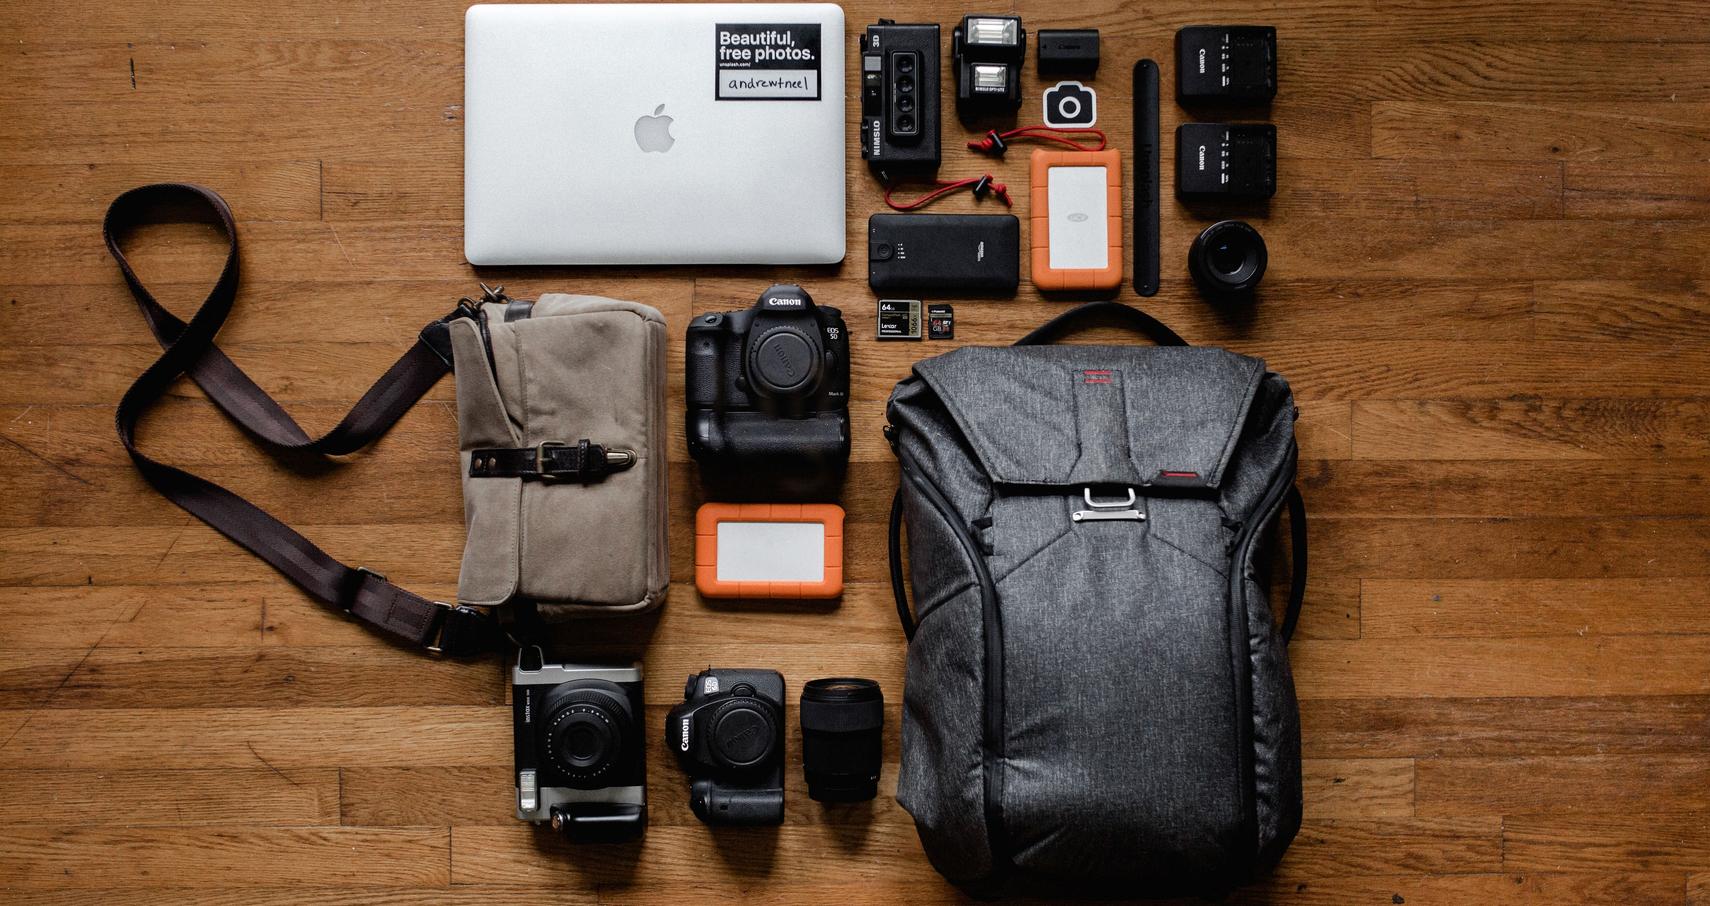 How to Pack an Overnight Bag: Essential Tips & Checklist